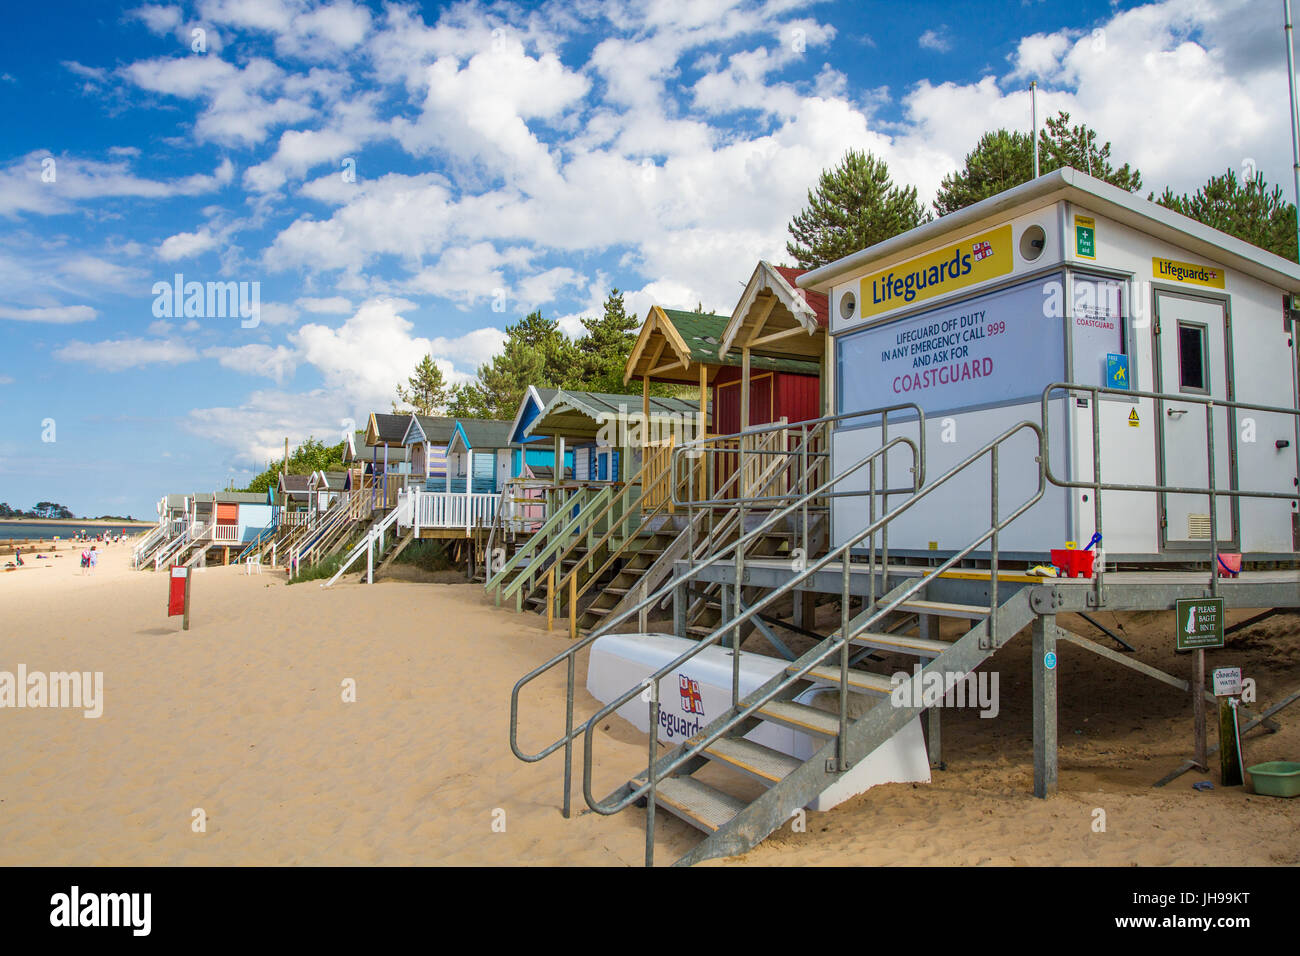 An HM Coastguard station and rows of beach huts on a sandy beach in Norfolk, UK that is closed representing a beach that is unattended by lifeguards. Stock Photo